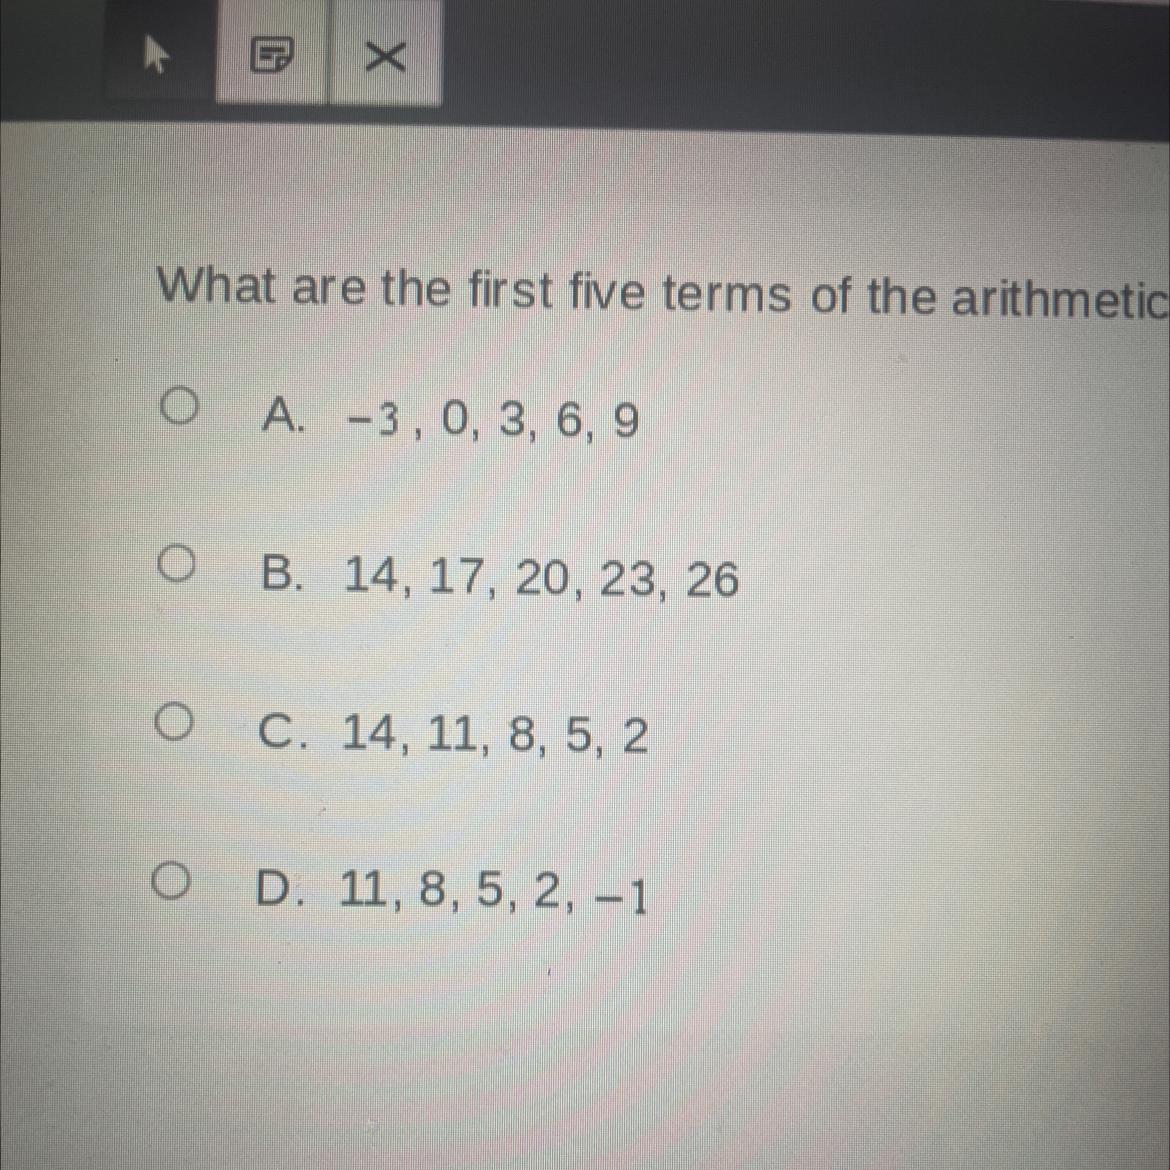 What Are The First Five Terms Of The Arithmetic Sequence Defined Explicitly By The Formula An=14 - 3n